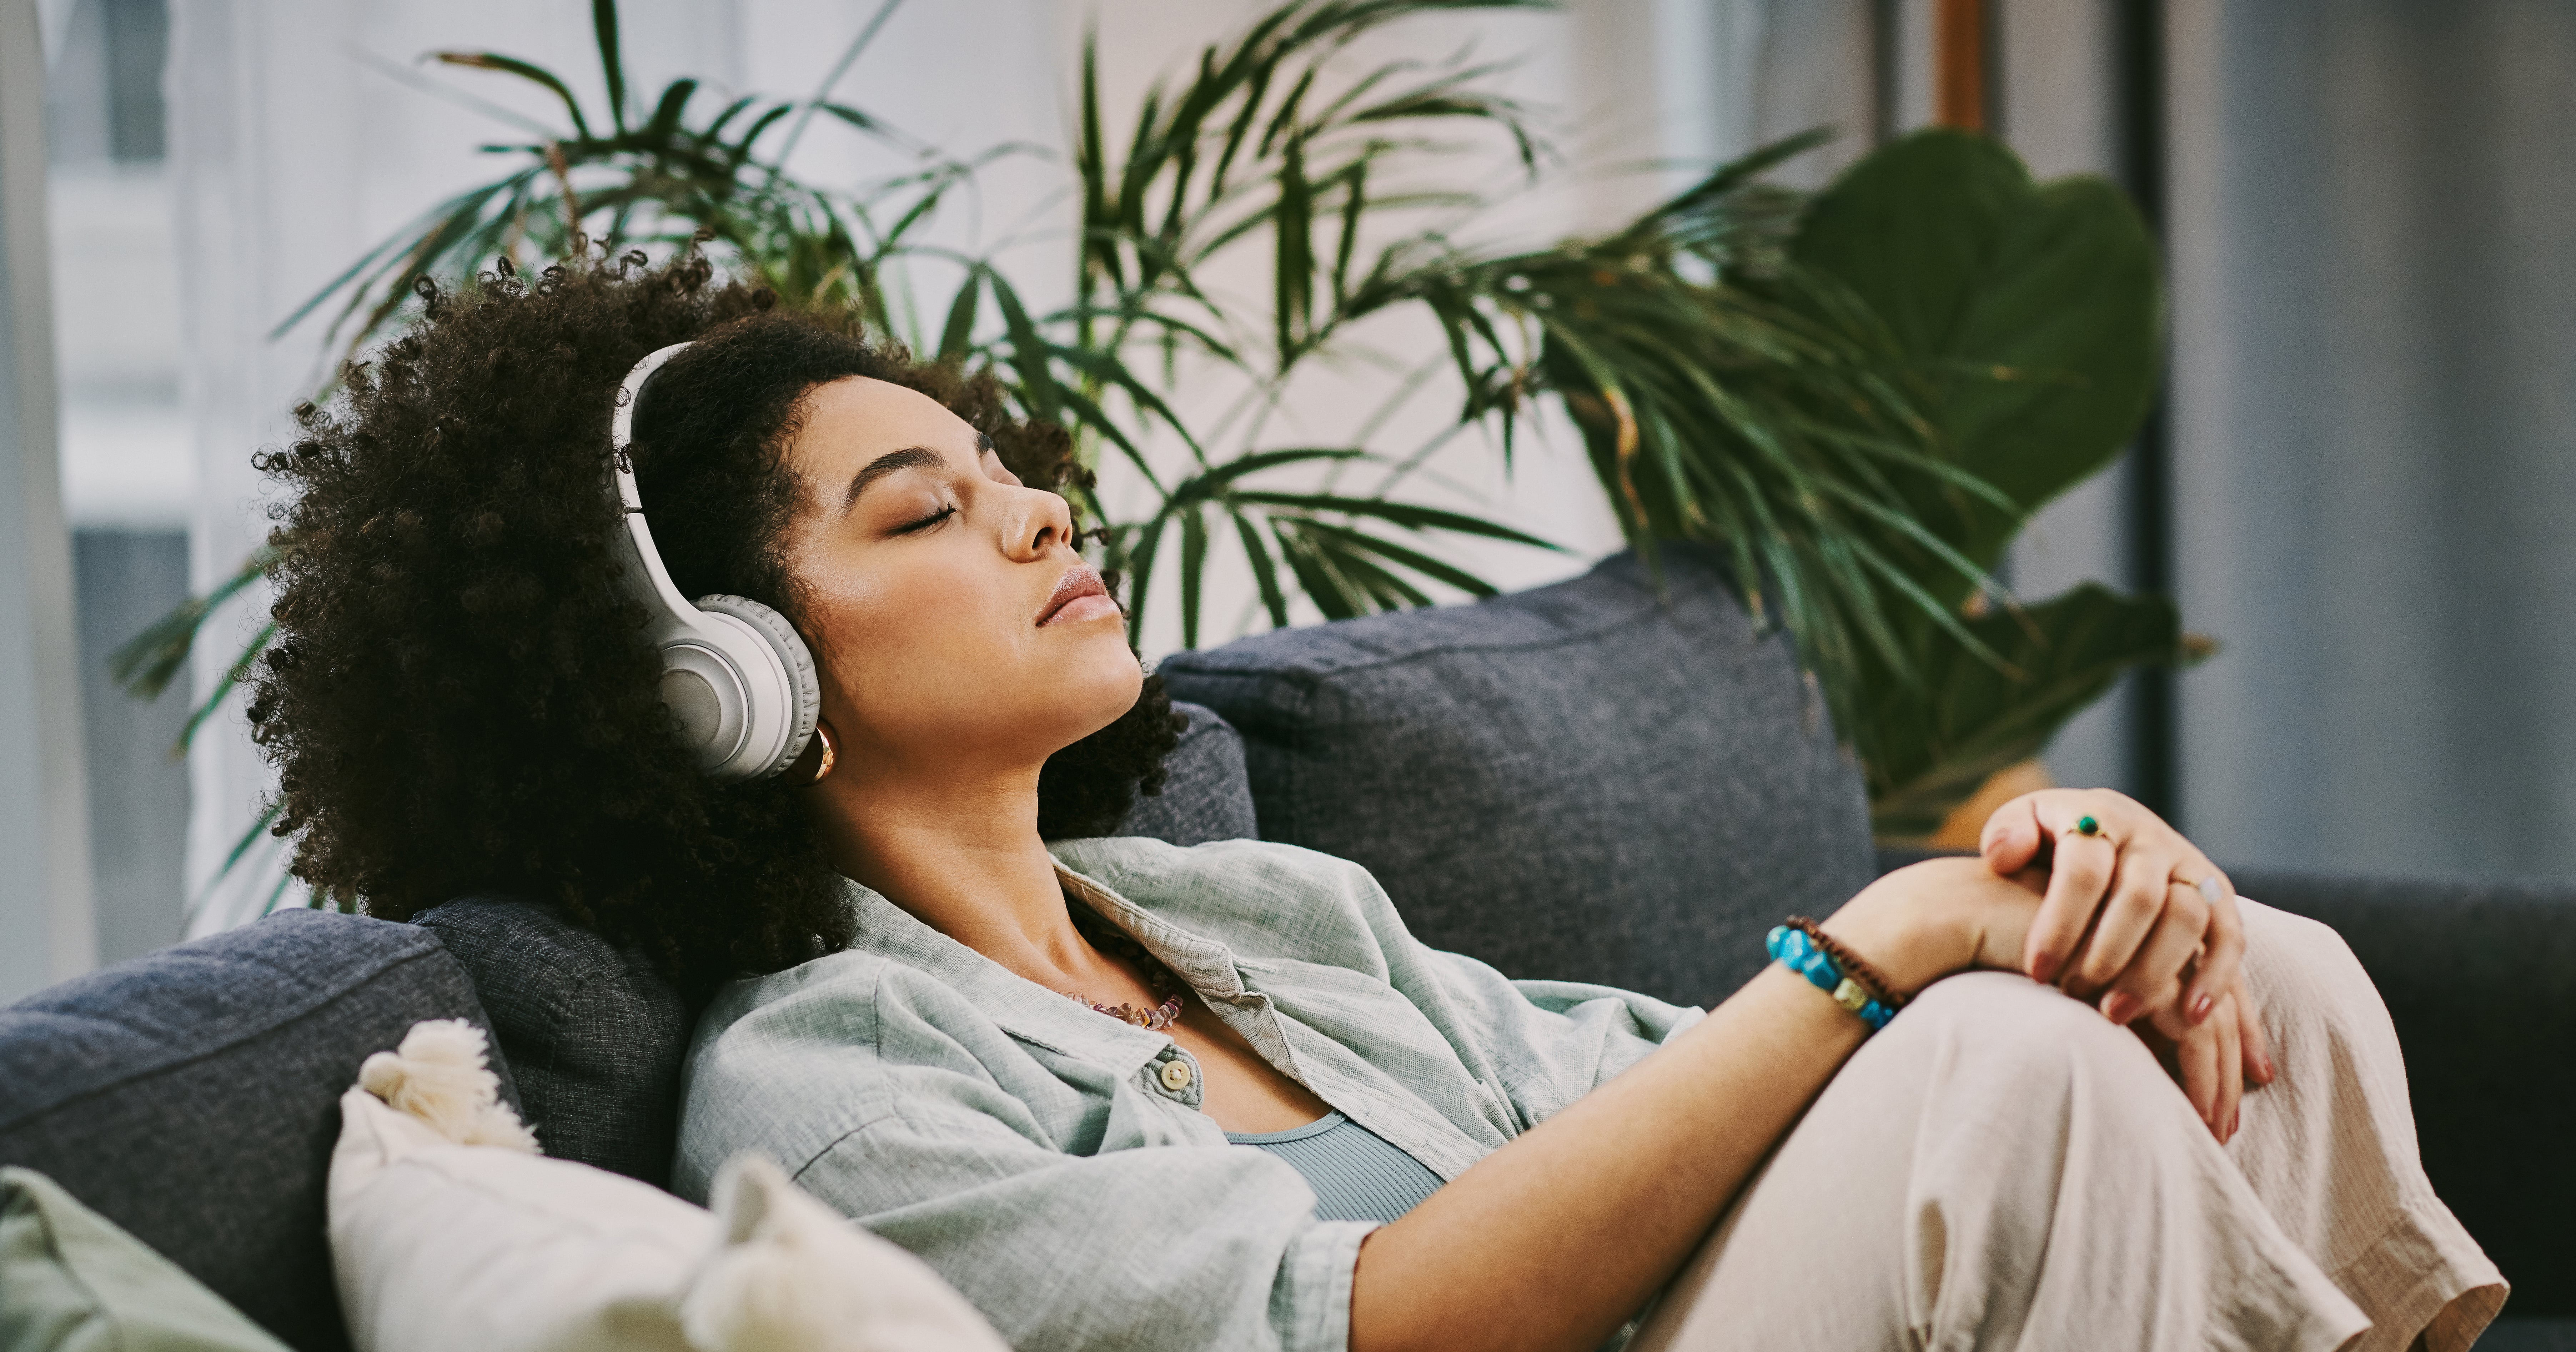 I Tried Sound Therapy for Chronic Pain